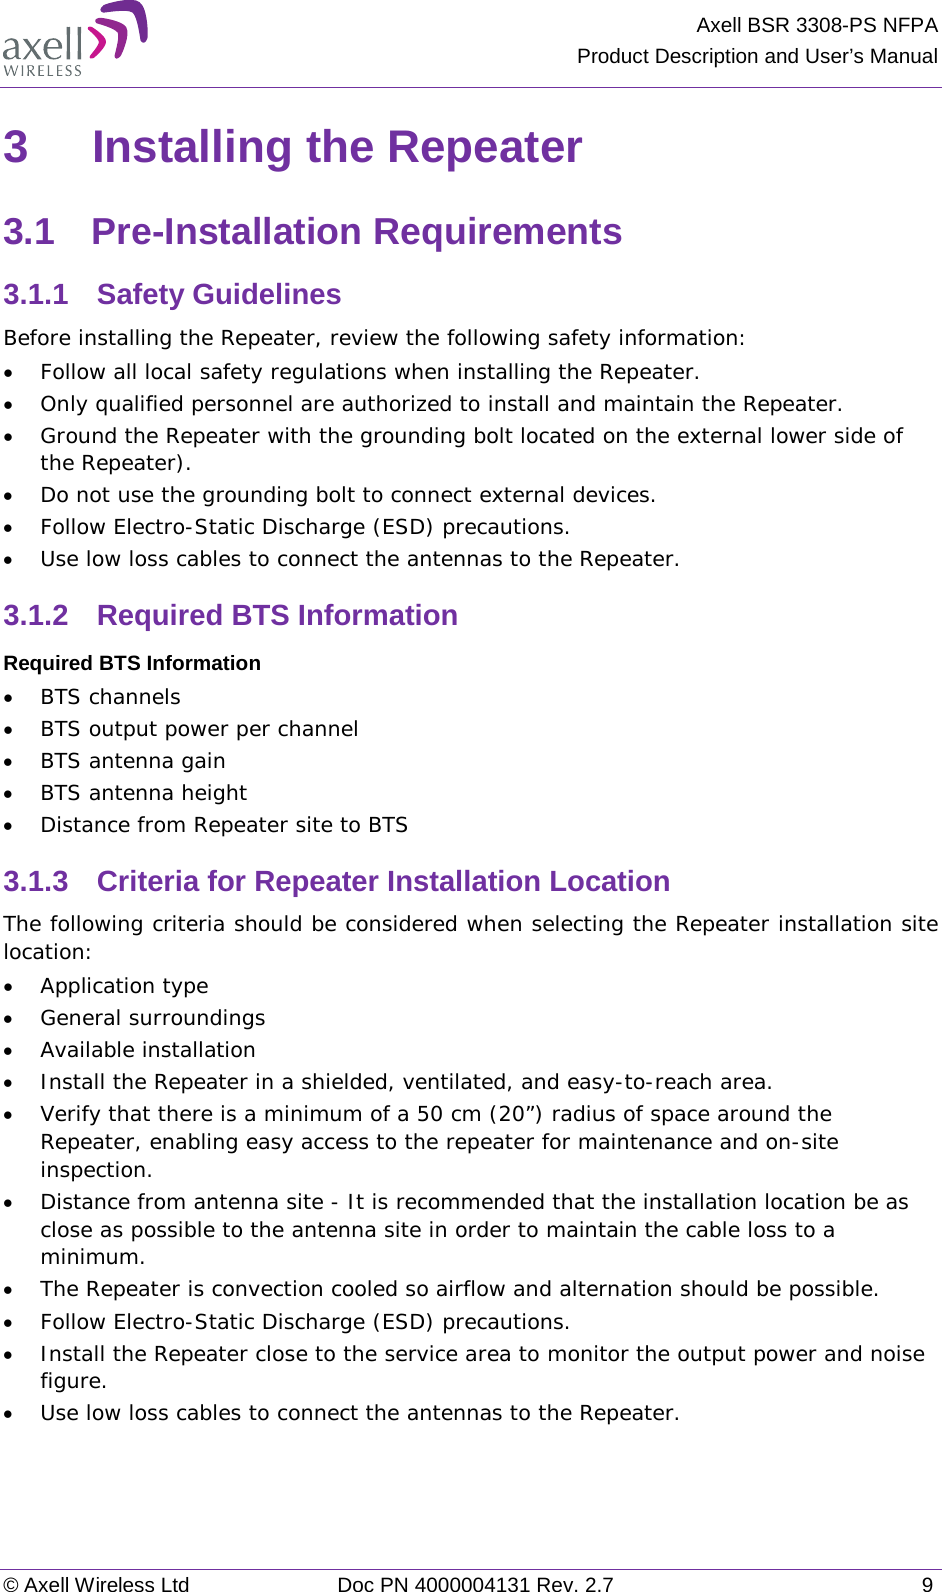 Axell BSR 3308-PS NFPA Product Description and User’s Manual © Axell Wireless Ltd Doc PN 4000004131 Rev. 2.7  9 3  Installing the Repeater 3.1  Pre-Installation Requirements 3.1.1  Safety Guidelines Before installing the Repeater, review the following safety information:  • Follow all local safety regulations when installing the Repeater. • Only qualified personnel are authorized to install and maintain the Repeater. • Ground the Repeater with the grounding bolt located on the external lower side of the Repeater). • Do not use the grounding bolt to connect external devices. • Follow Electro-Static Discharge (ESD) precautions. • Use low loss cables to connect the antennas to the Repeater. 3.1.2  Required BTS Information Required BTS Information • BTS channels • BTS output power per channel • BTS antenna gain • BTS antenna height  • Distance from Repeater site to BTS 3.1.3  Criteria for Repeater Installation Location The following criteria should be considered when selecting the Repeater installation site location: • Application type • General surroundings • Available installation • Install the Repeater in a shielded, ventilated, and easy-to-reach area. • Verify that there is a minimum of a 50 cm (20”) radius of space around the Repeater, enabling easy access to the repeater for maintenance and on-site inspection. • Distance from antenna site - It is recommended that the installation location be as close as possible to the antenna site in order to maintain the cable loss to a minimum. • The Repeater is convection cooled so airflow and alternation should be possible. • Follow Electro-Static Discharge (ESD) precautions. • Install the Repeater close to the service area to monitor the output power and noise figure. • Use low loss cables to connect the antennas to the Repeater.   